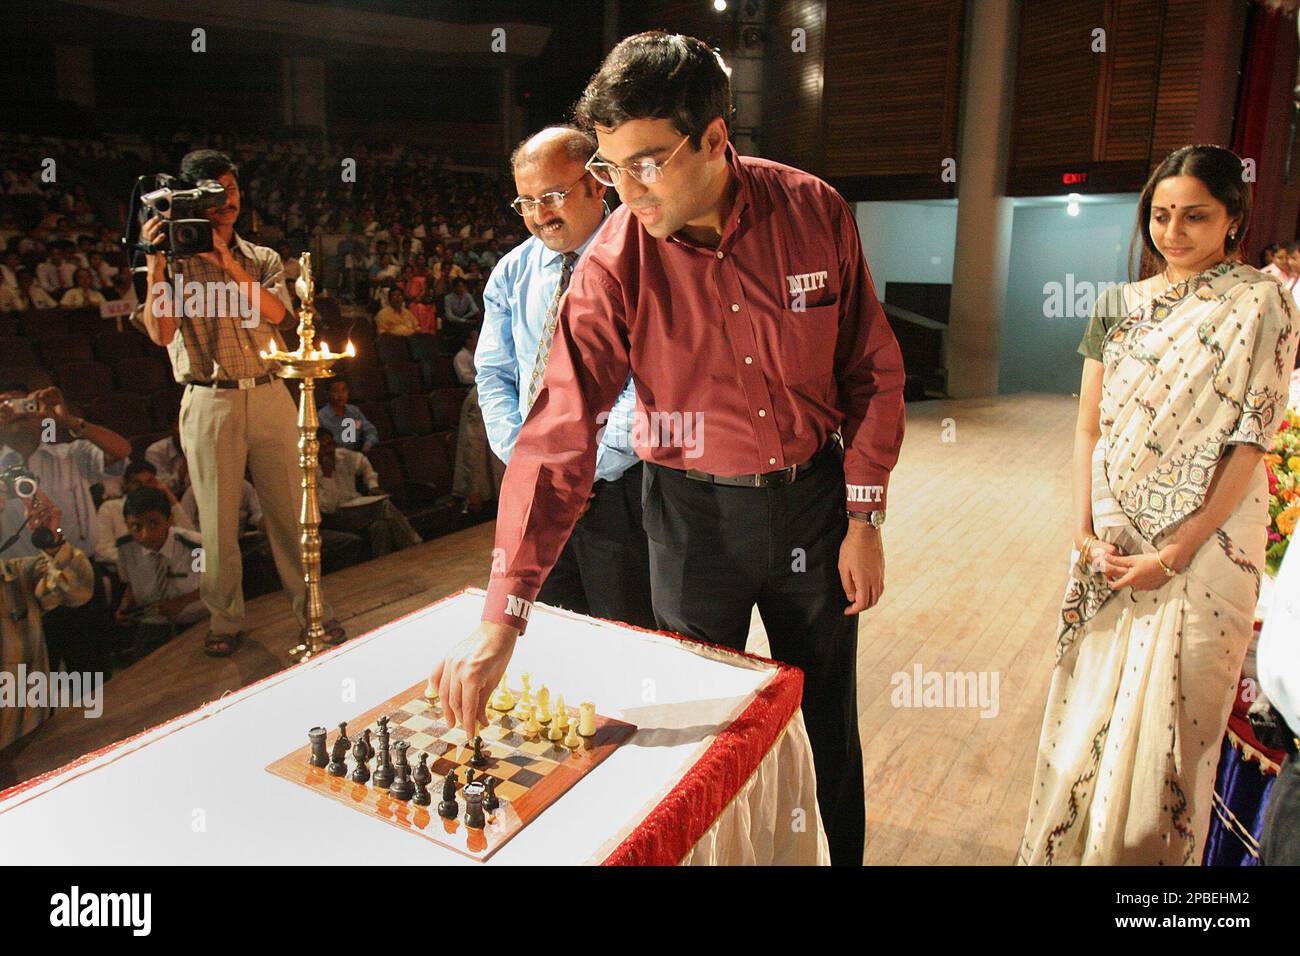 Aruna Anand, wife of Indian chess grandmaster Viswanathan Anand, right,  gives him a piece of cake during her birthday celebrations in Gauhati,  India, Thursday, June 30, 2005. (AP Photo/Anupam Nath Stock Photo 